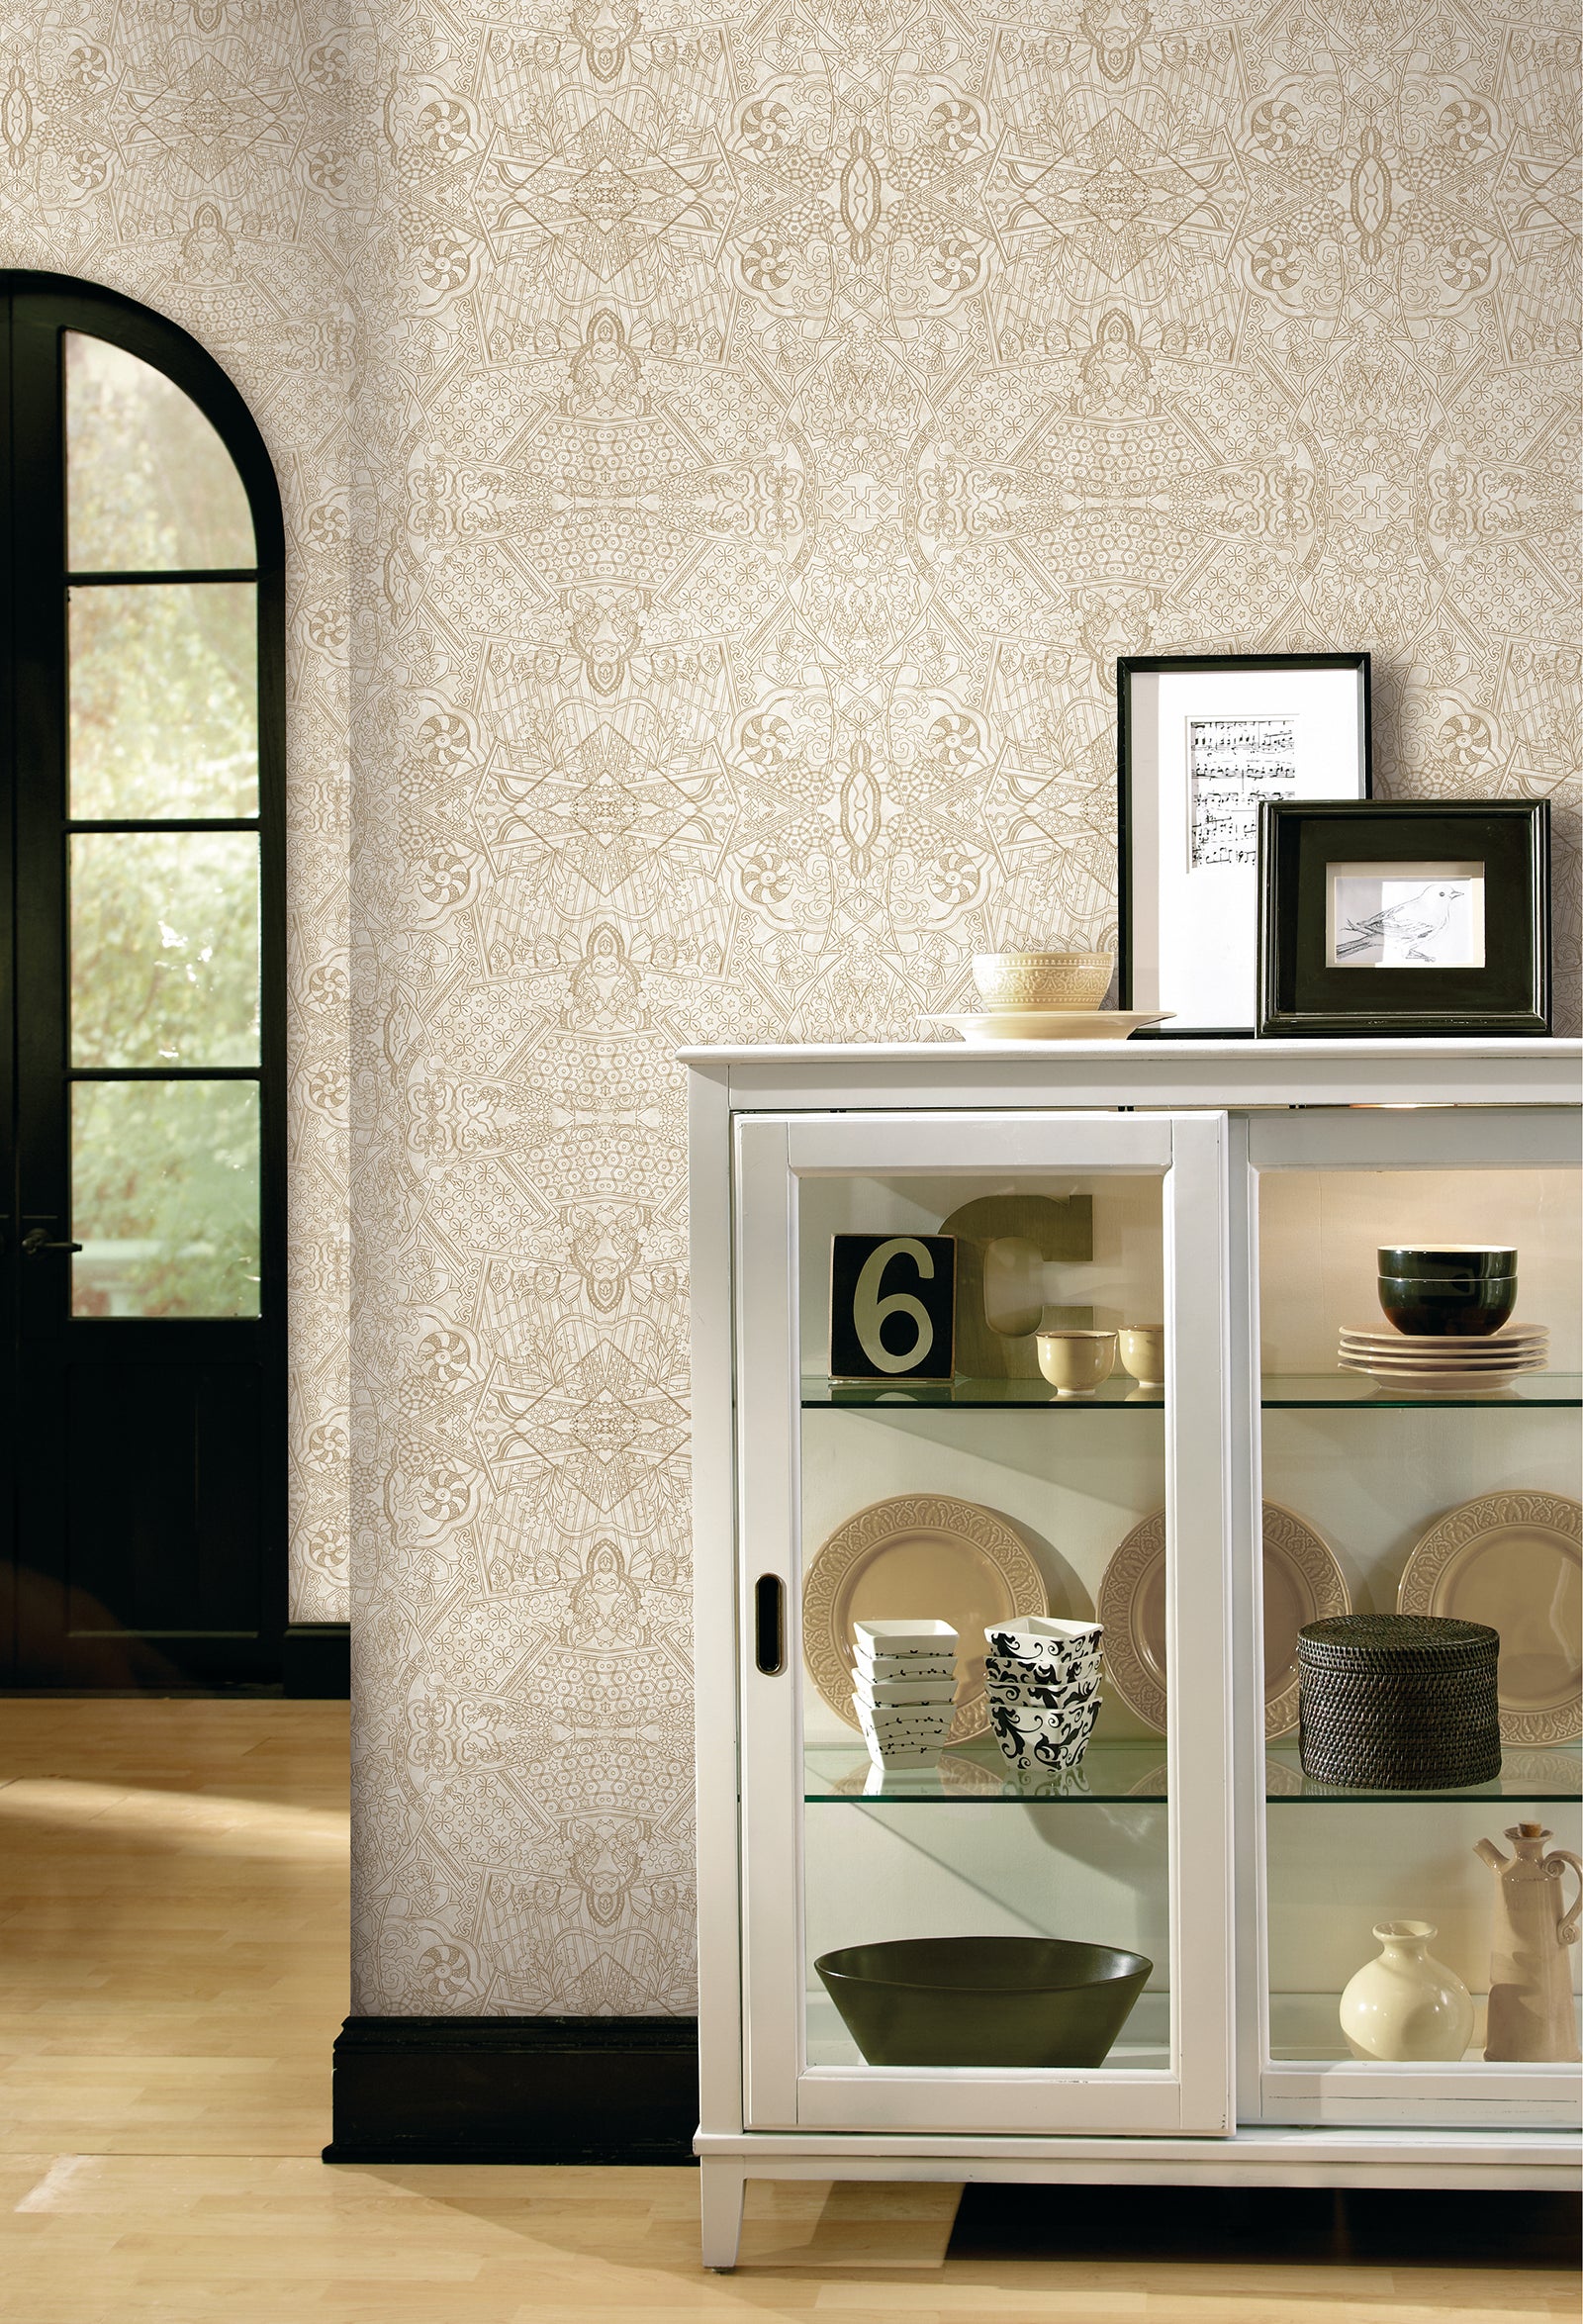 Jaw Dropping Deals on Designer Wallpapers and Wallcoverings